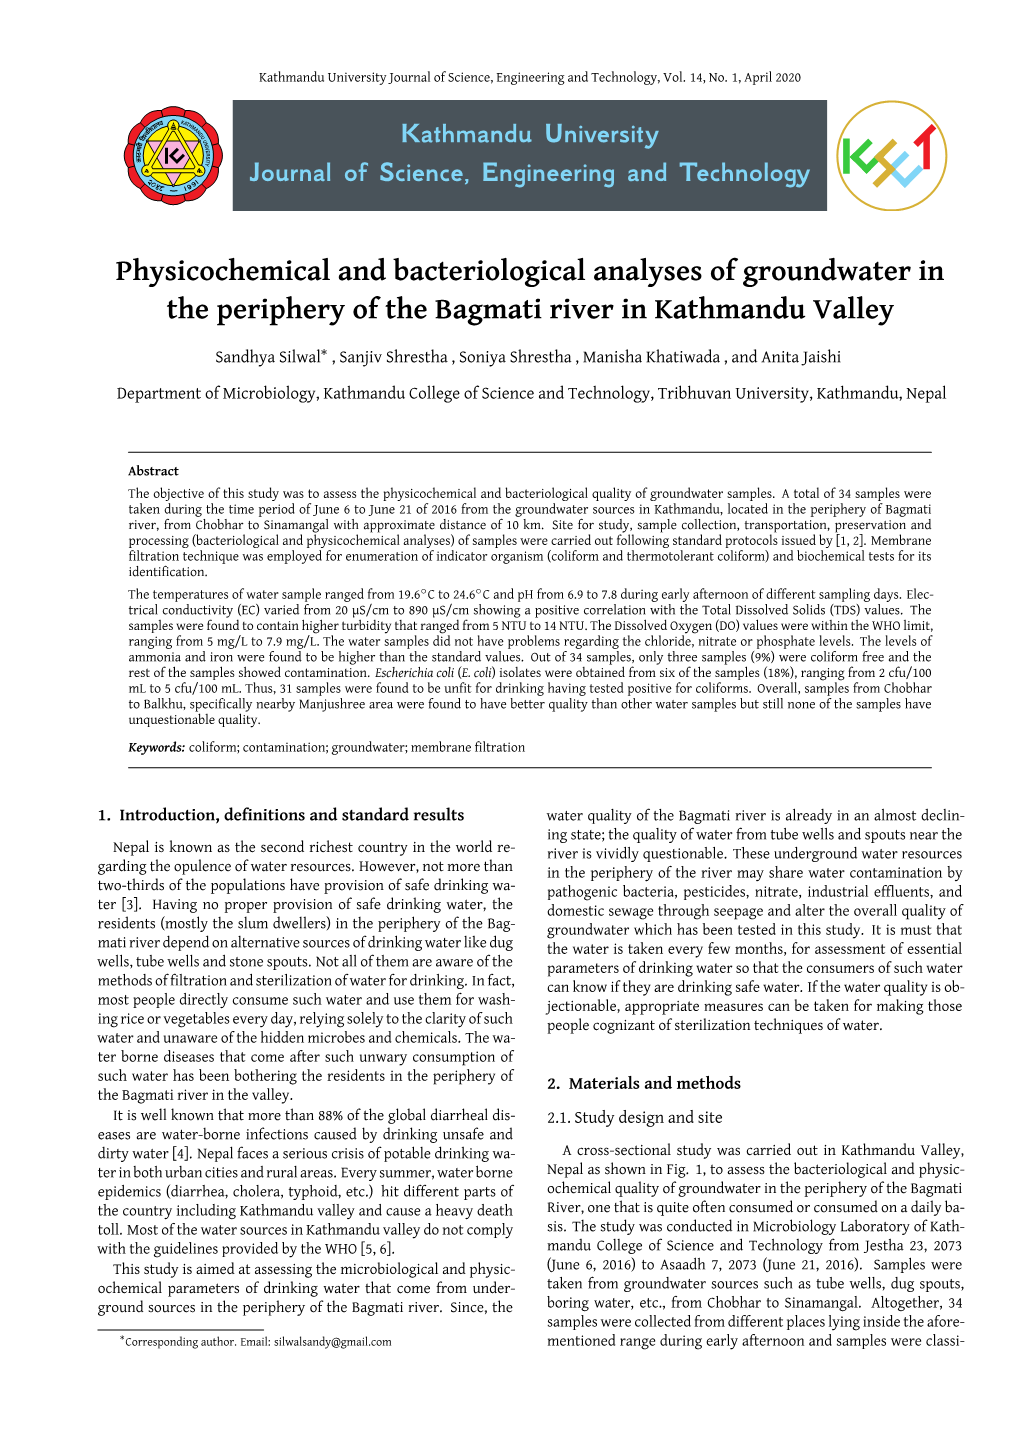 Physicochemical and Bacteriological Analyses of Groundwater in the Periphery of the Bagmati River in Kathmandu Valley